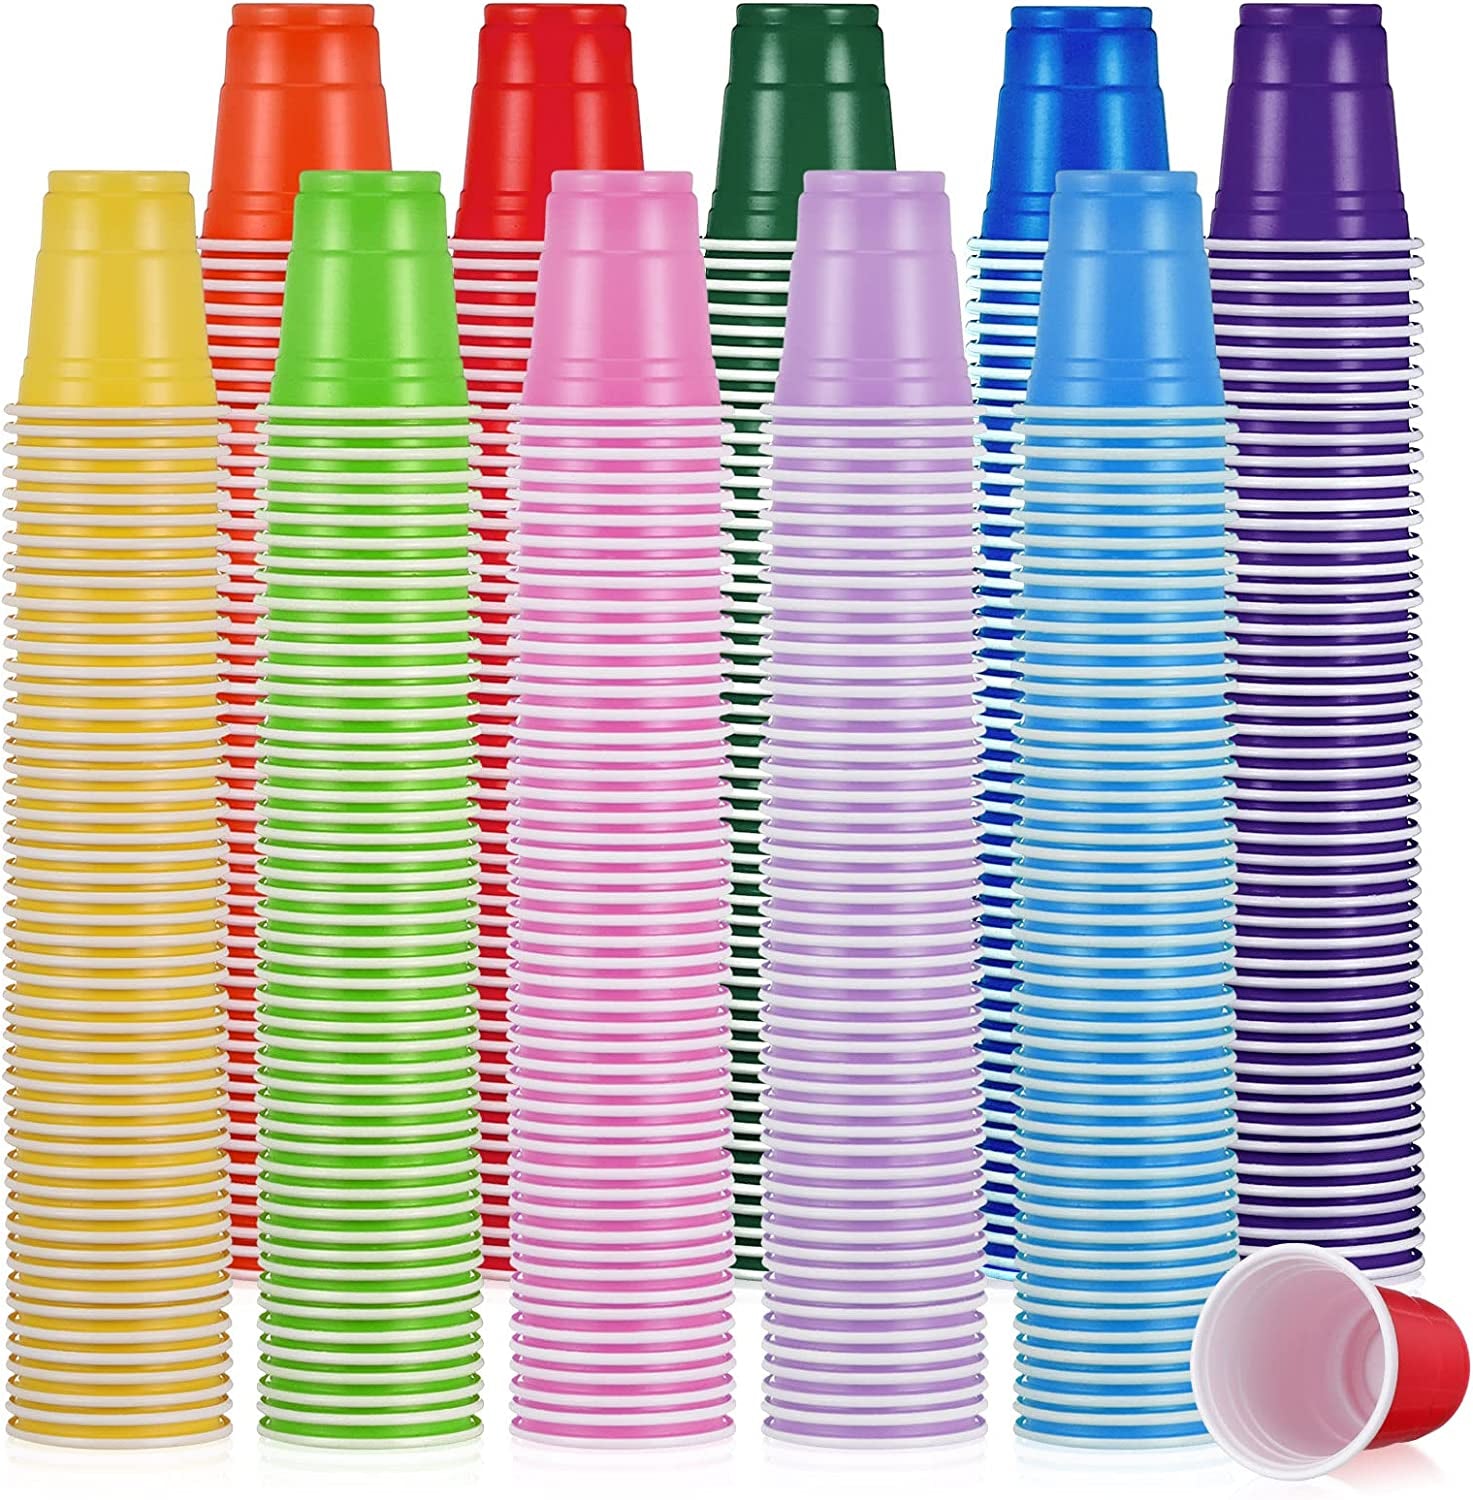 1000 Packs Plastic Shot Glasses 2Oz/ 60Ml Disposable Shot Glasses Bulk Assorted Party Shot Cup for Kids Birthday Wedding Holiday Party Restaurant Kitchen BBQ Picnic Camping Daily Life,10 Color